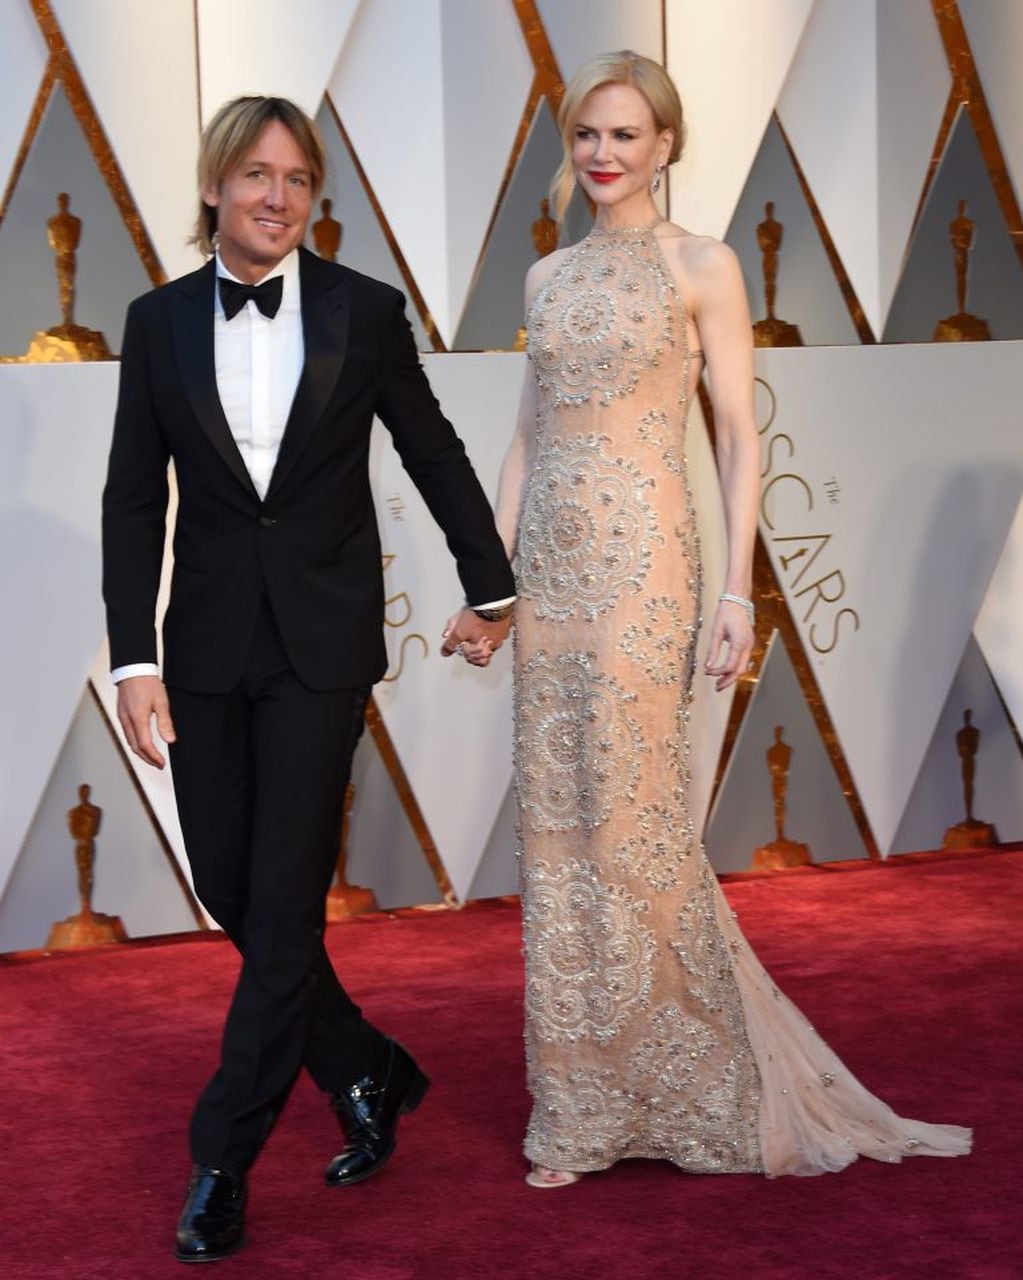 Nominee for Best Supporting Actress "Lion" Nicole Kidman (R) and Australian singer Keith Urban arrive on the red carpet for the 89th Oscars on February 26, 2017 in Hollywood, California.  / AFP PHOTO / VALERIE MACON